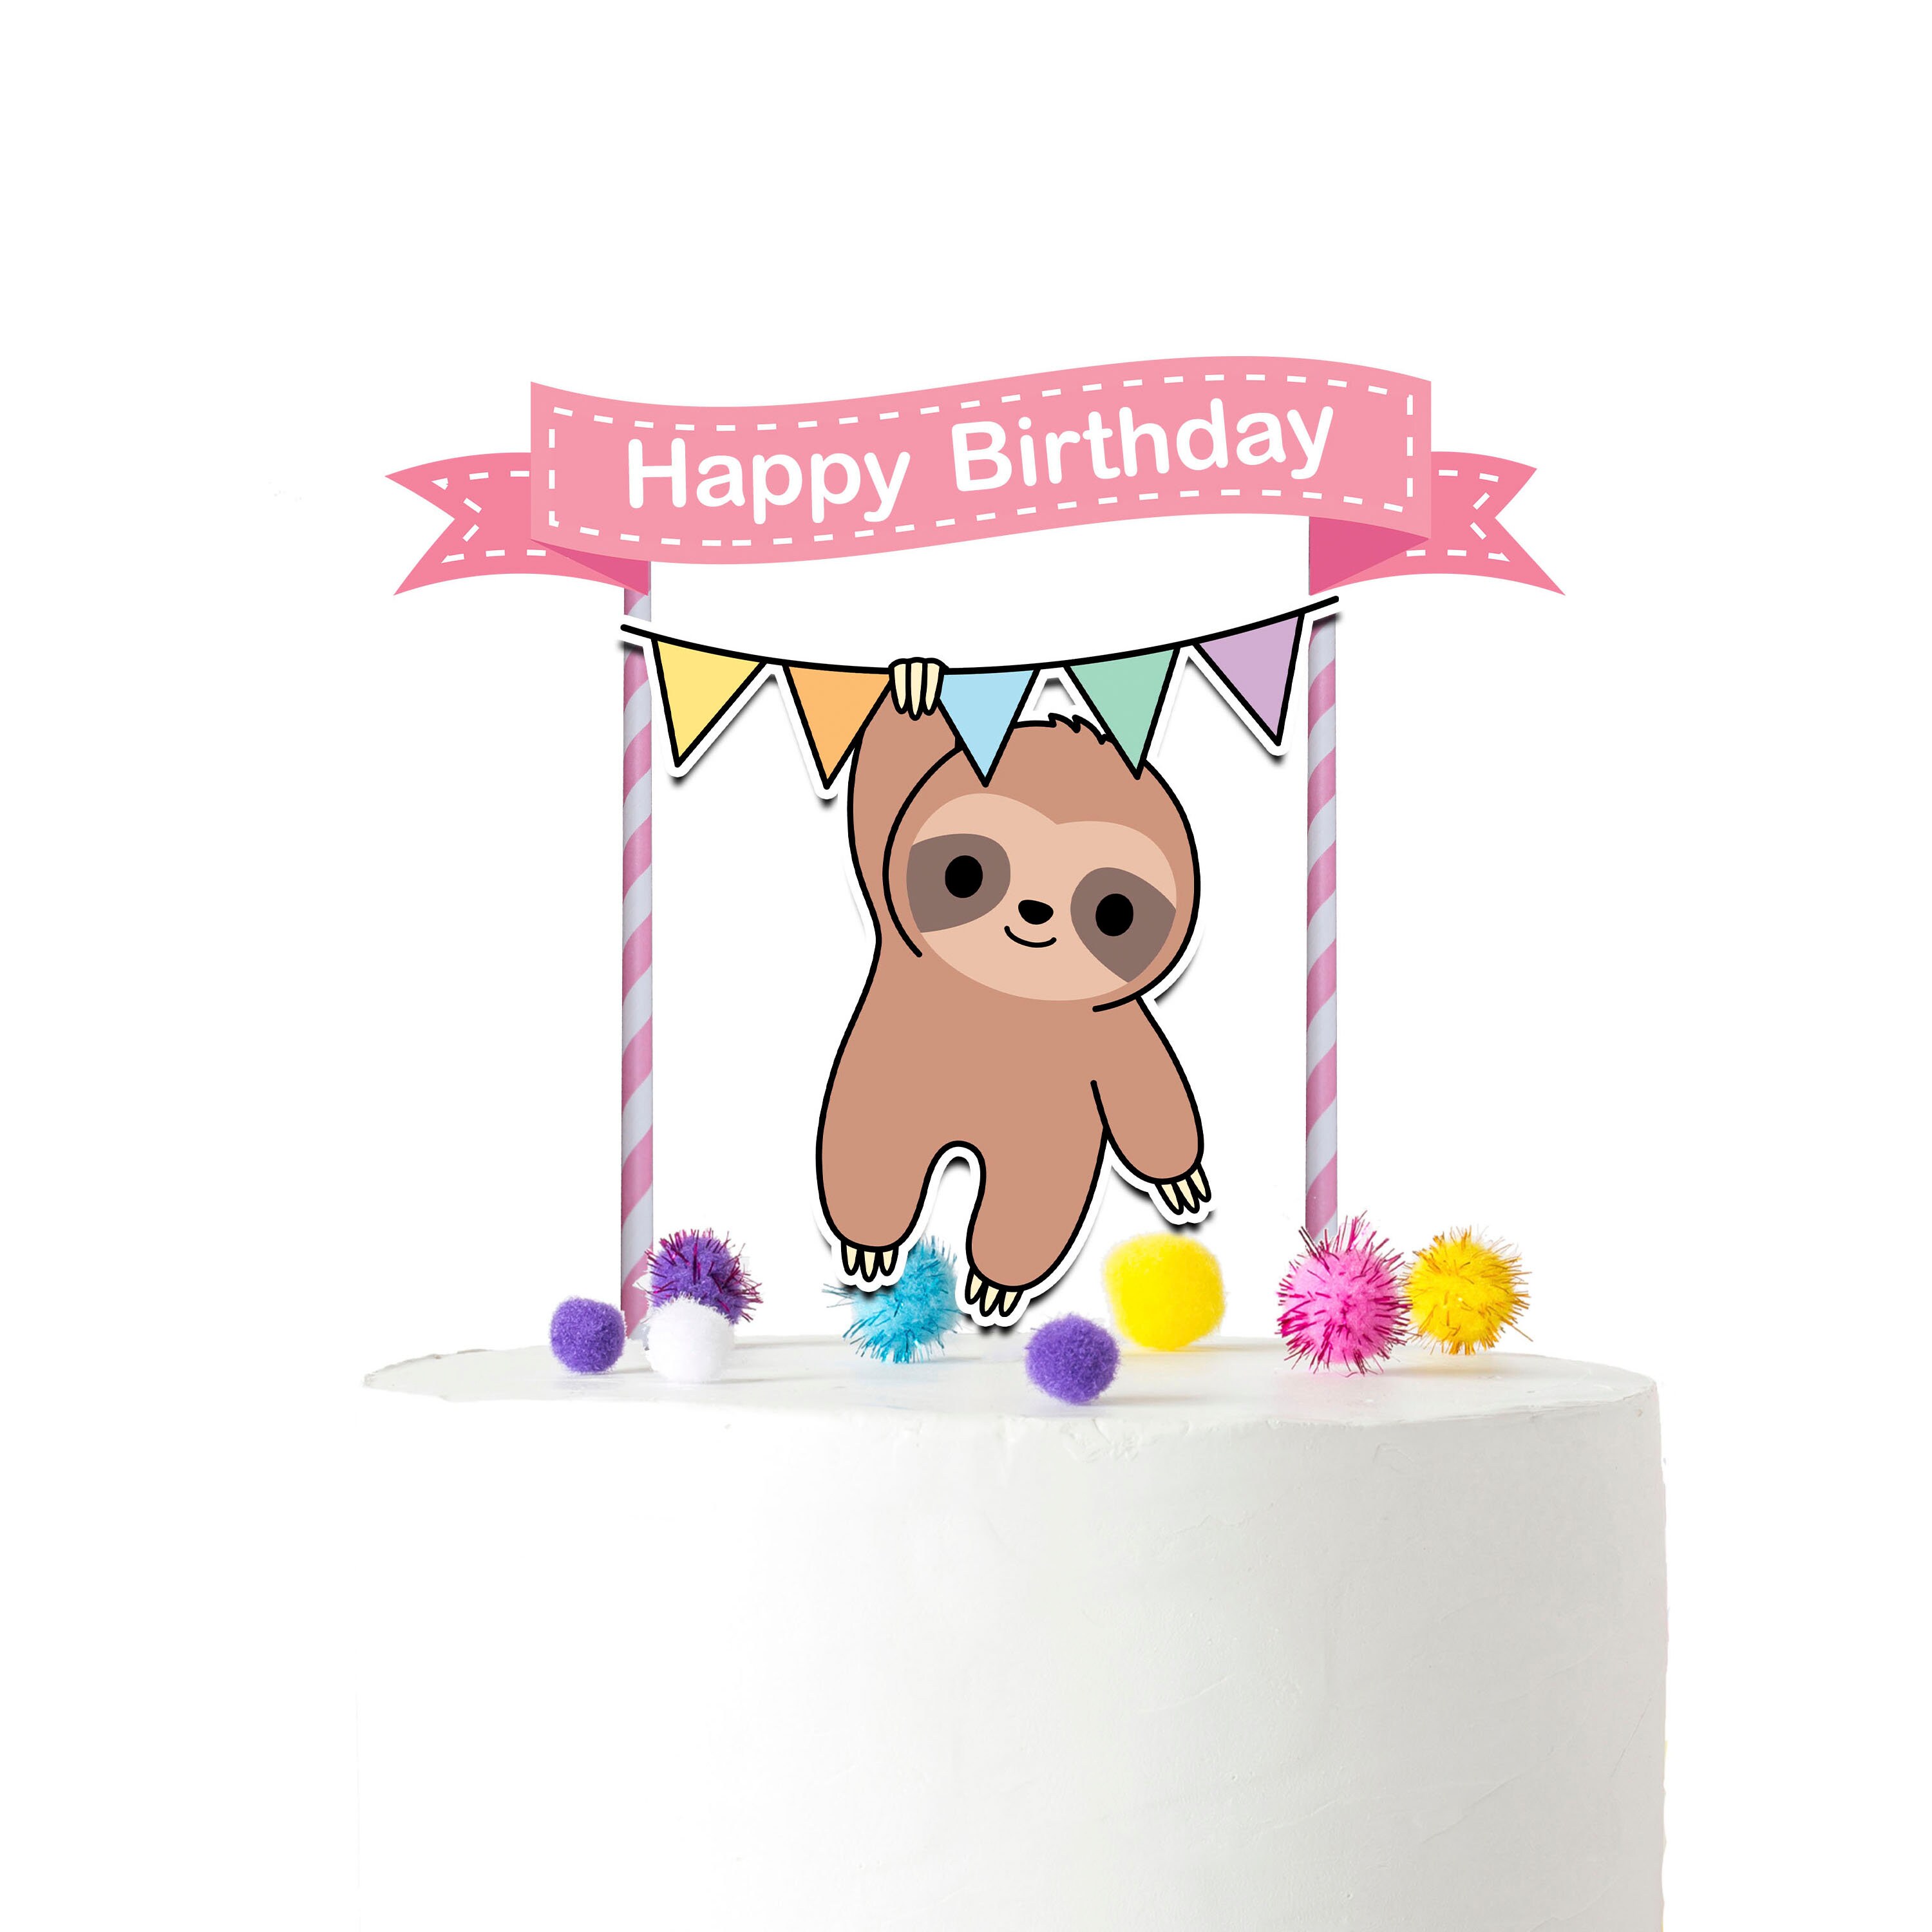 Sloth Party Cupcake Toppers  Sloth Party Toppers – Sunshine Parties